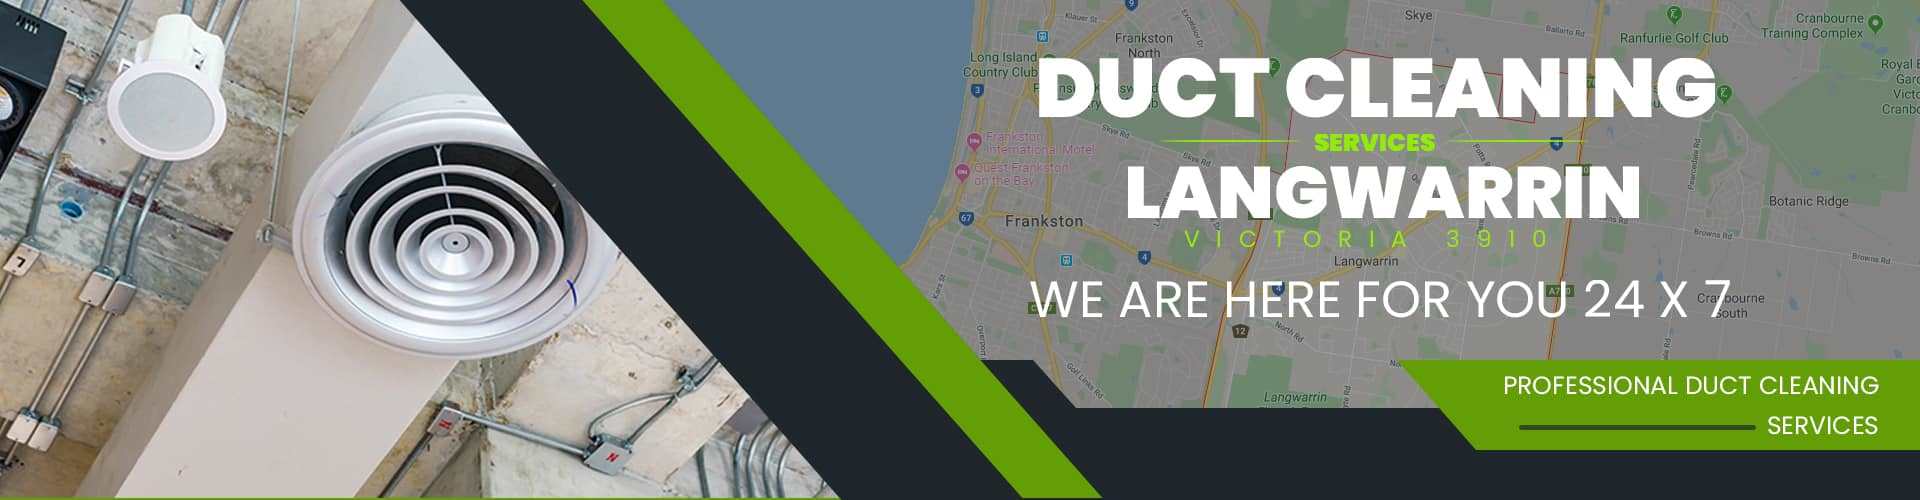 Duct Cleaning Langwarrin